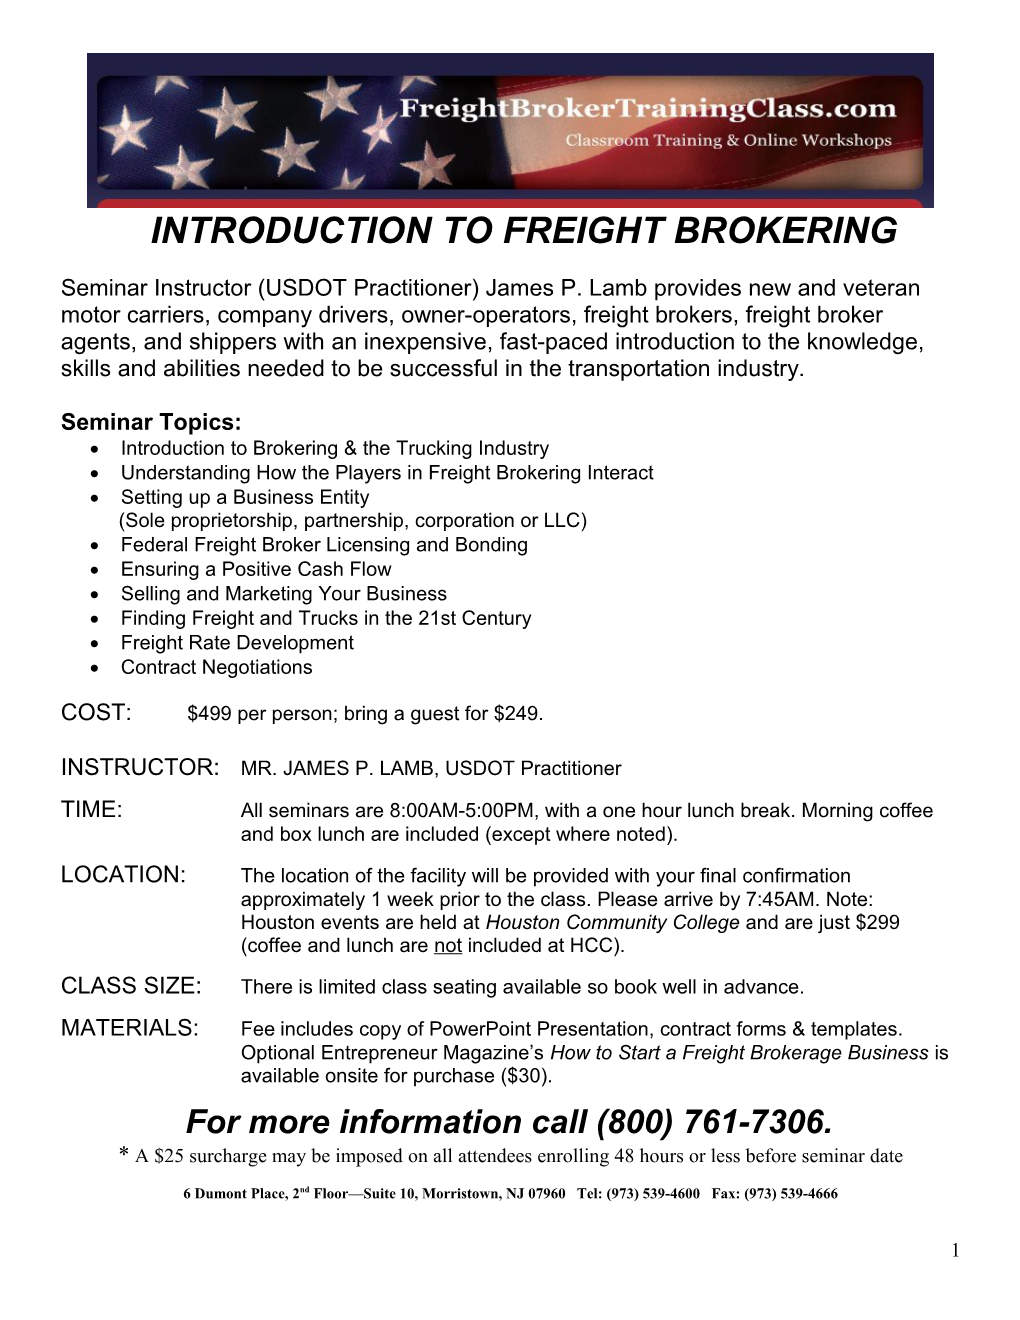 Introduction to Freight Brokering